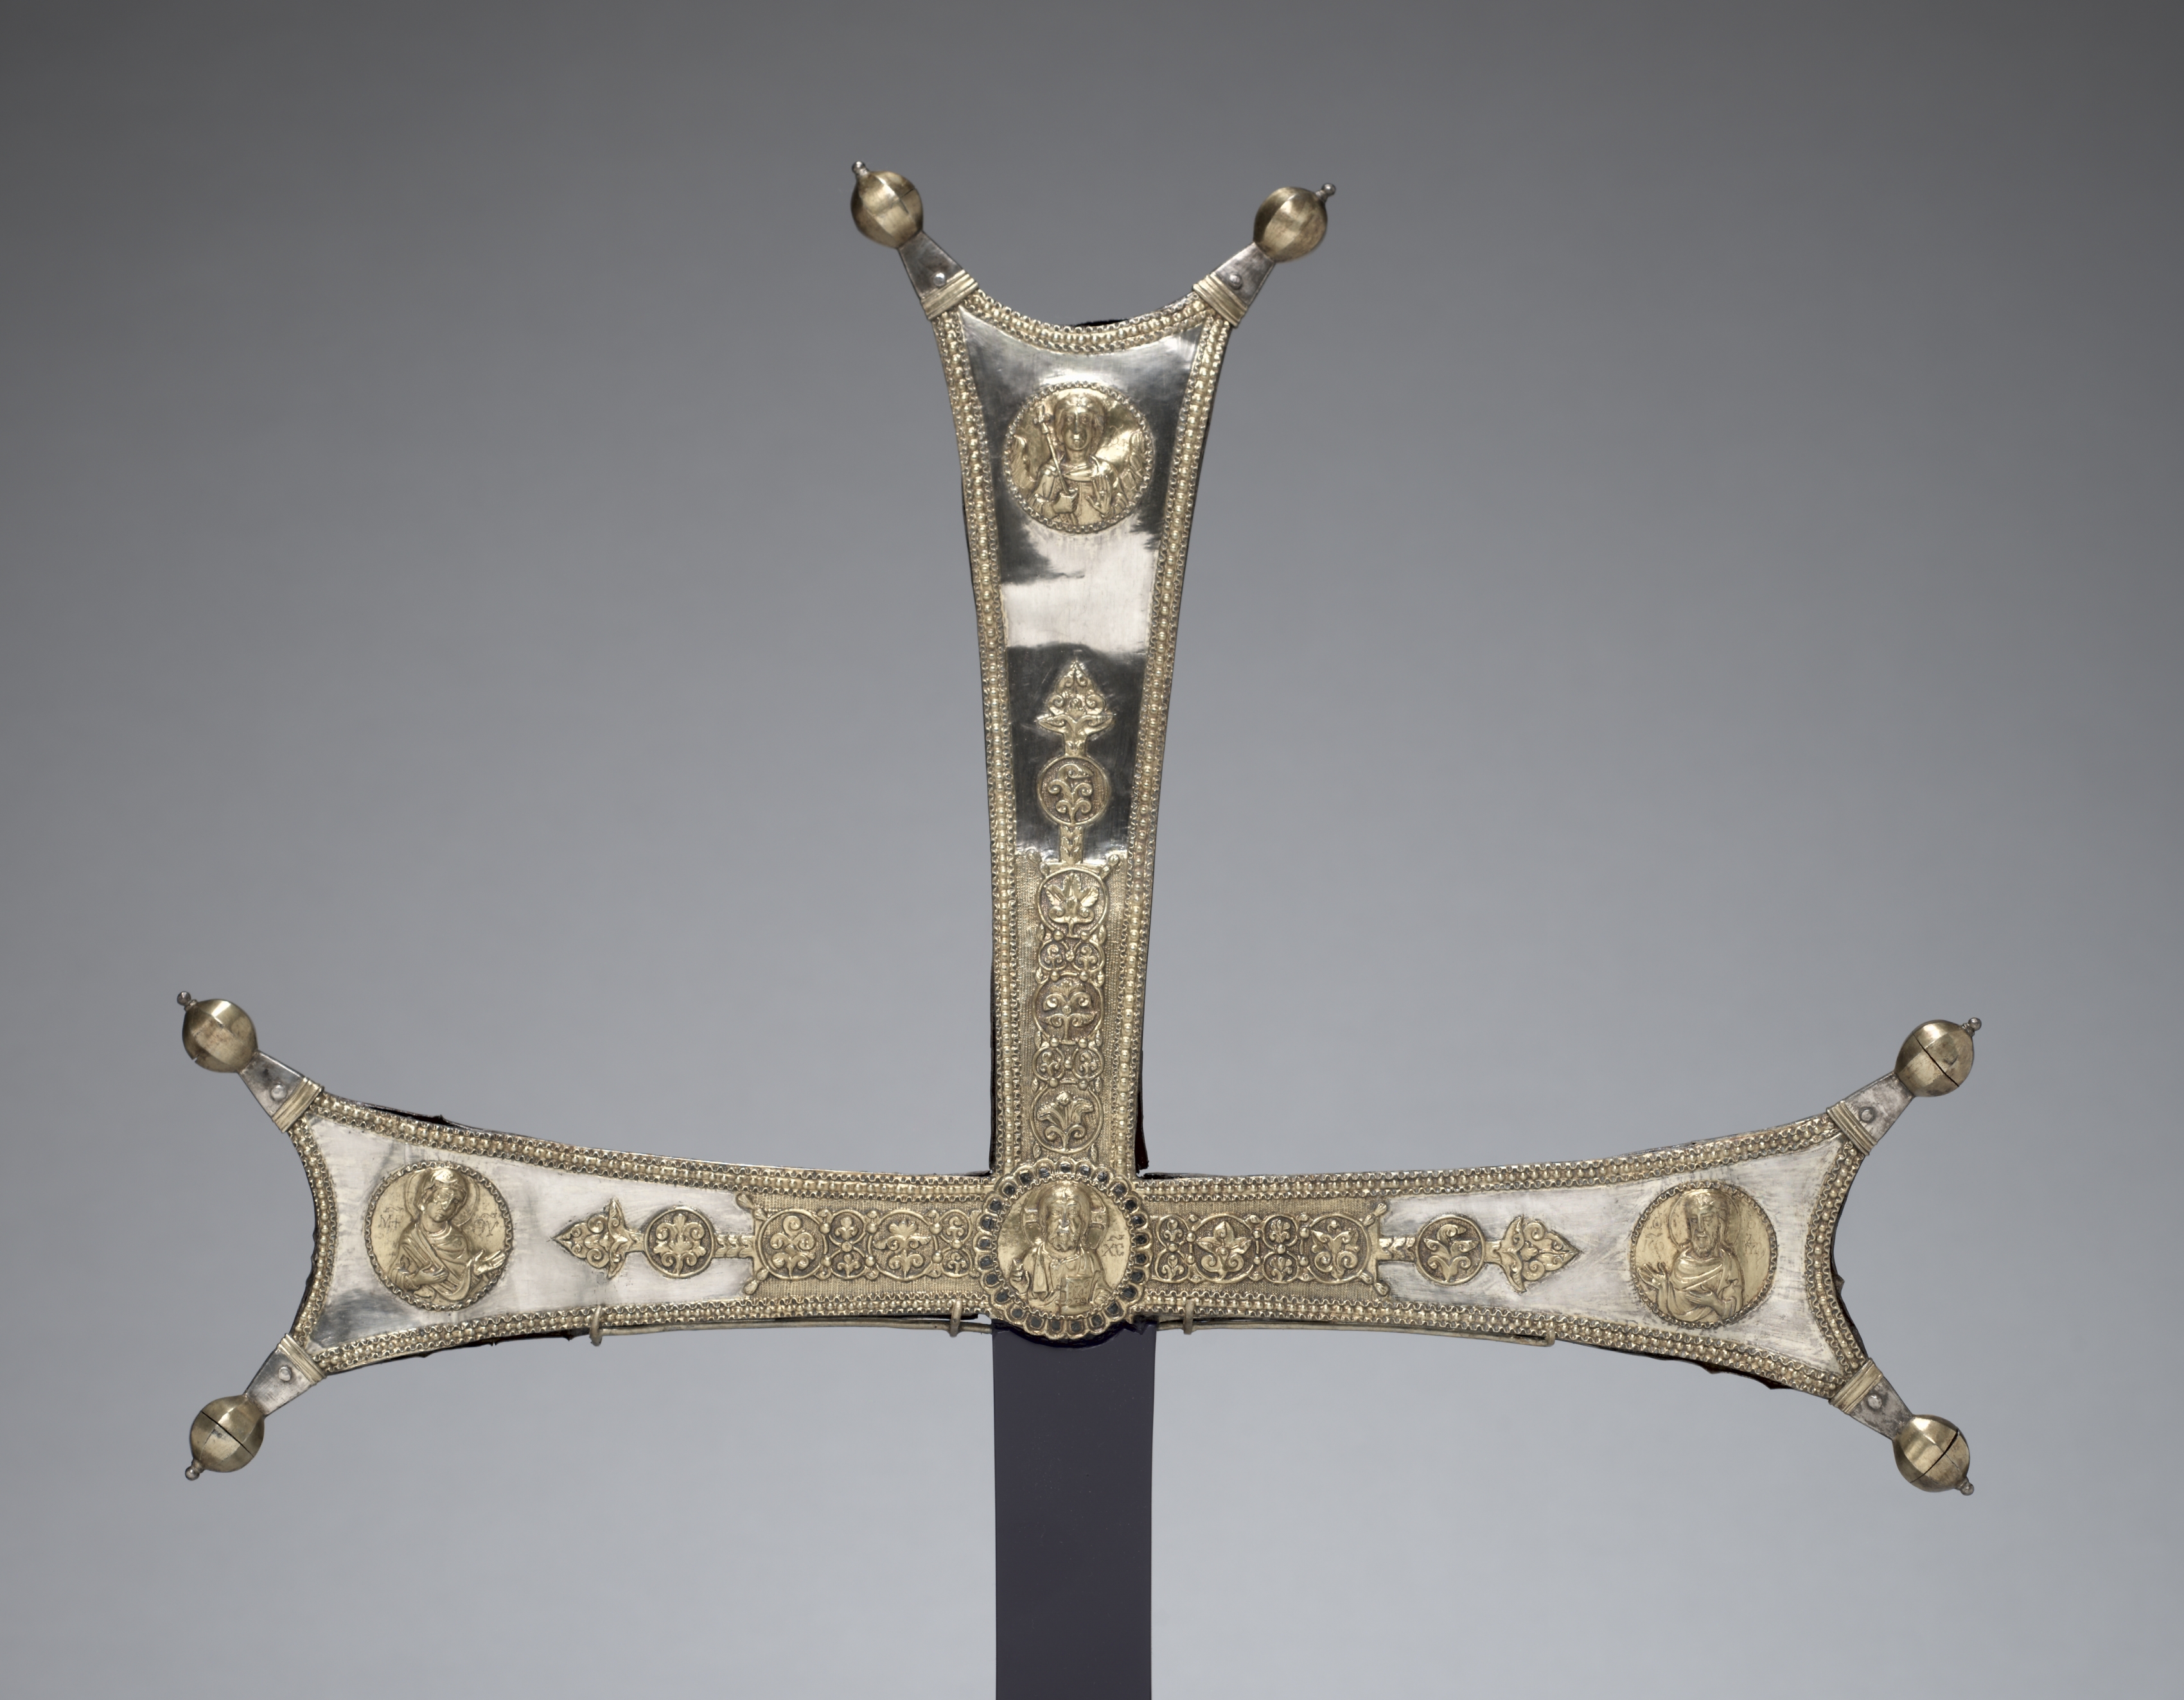 Fragment of a Processional Cross